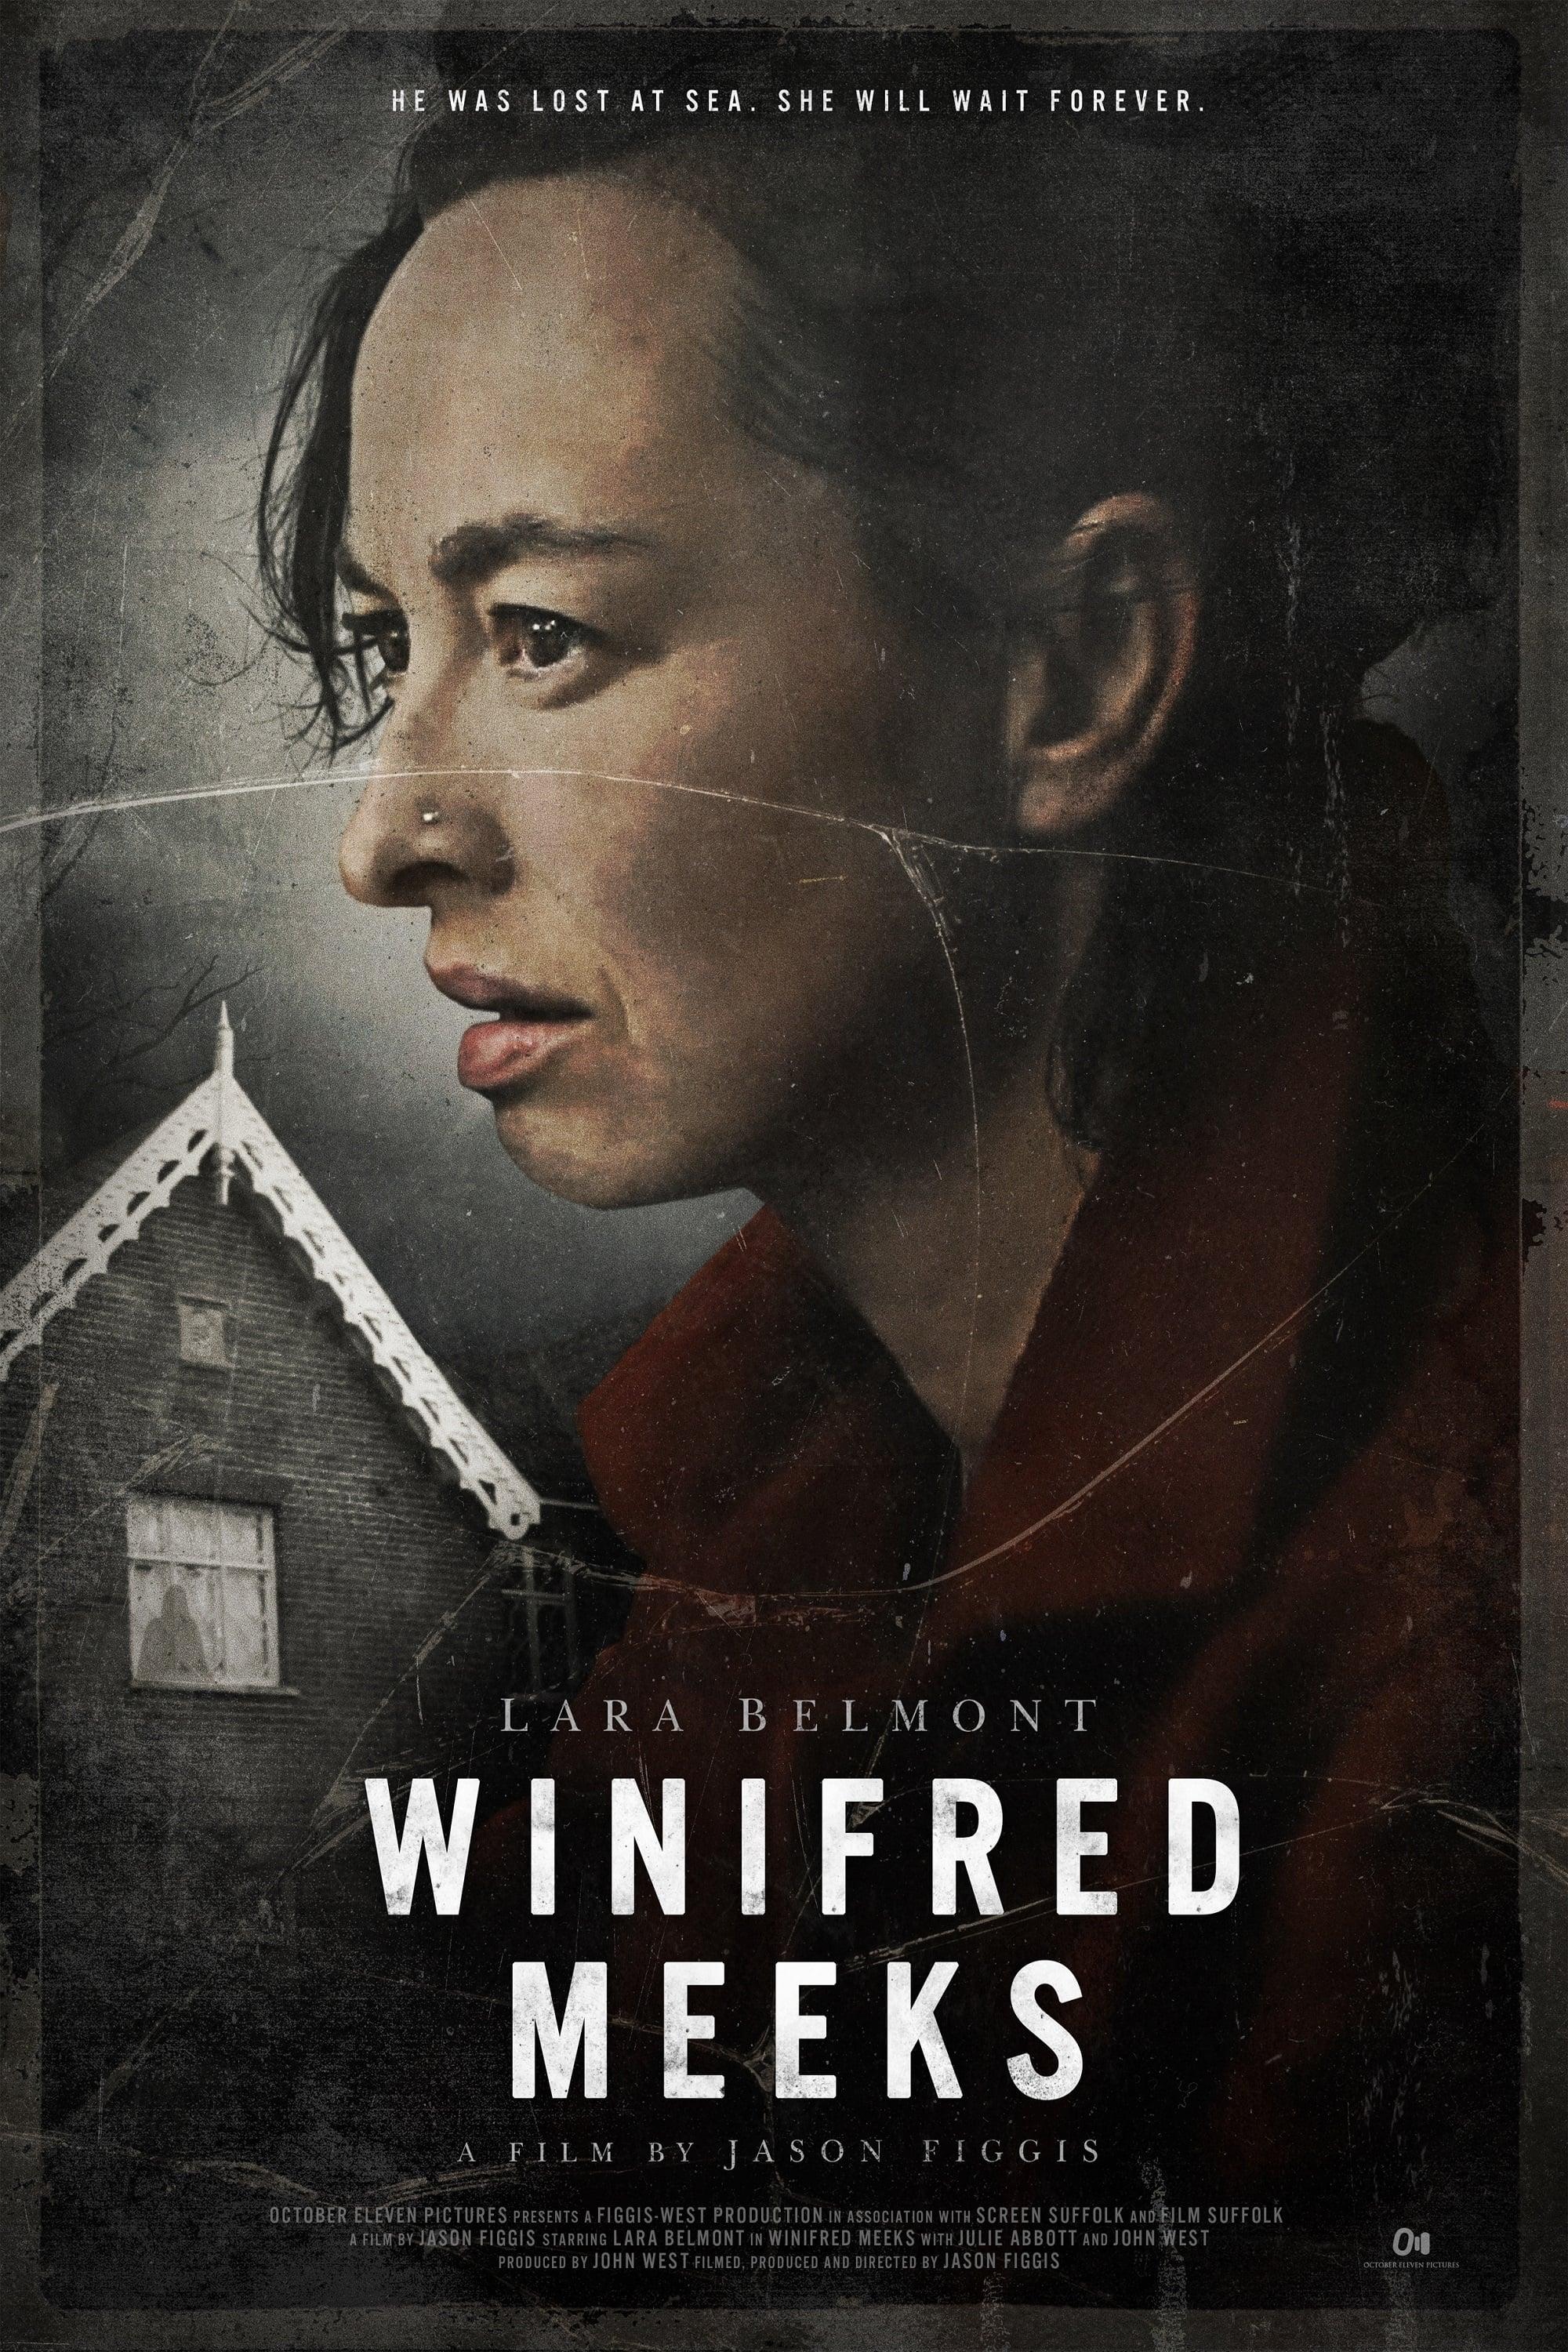 Winifred Meeks poster